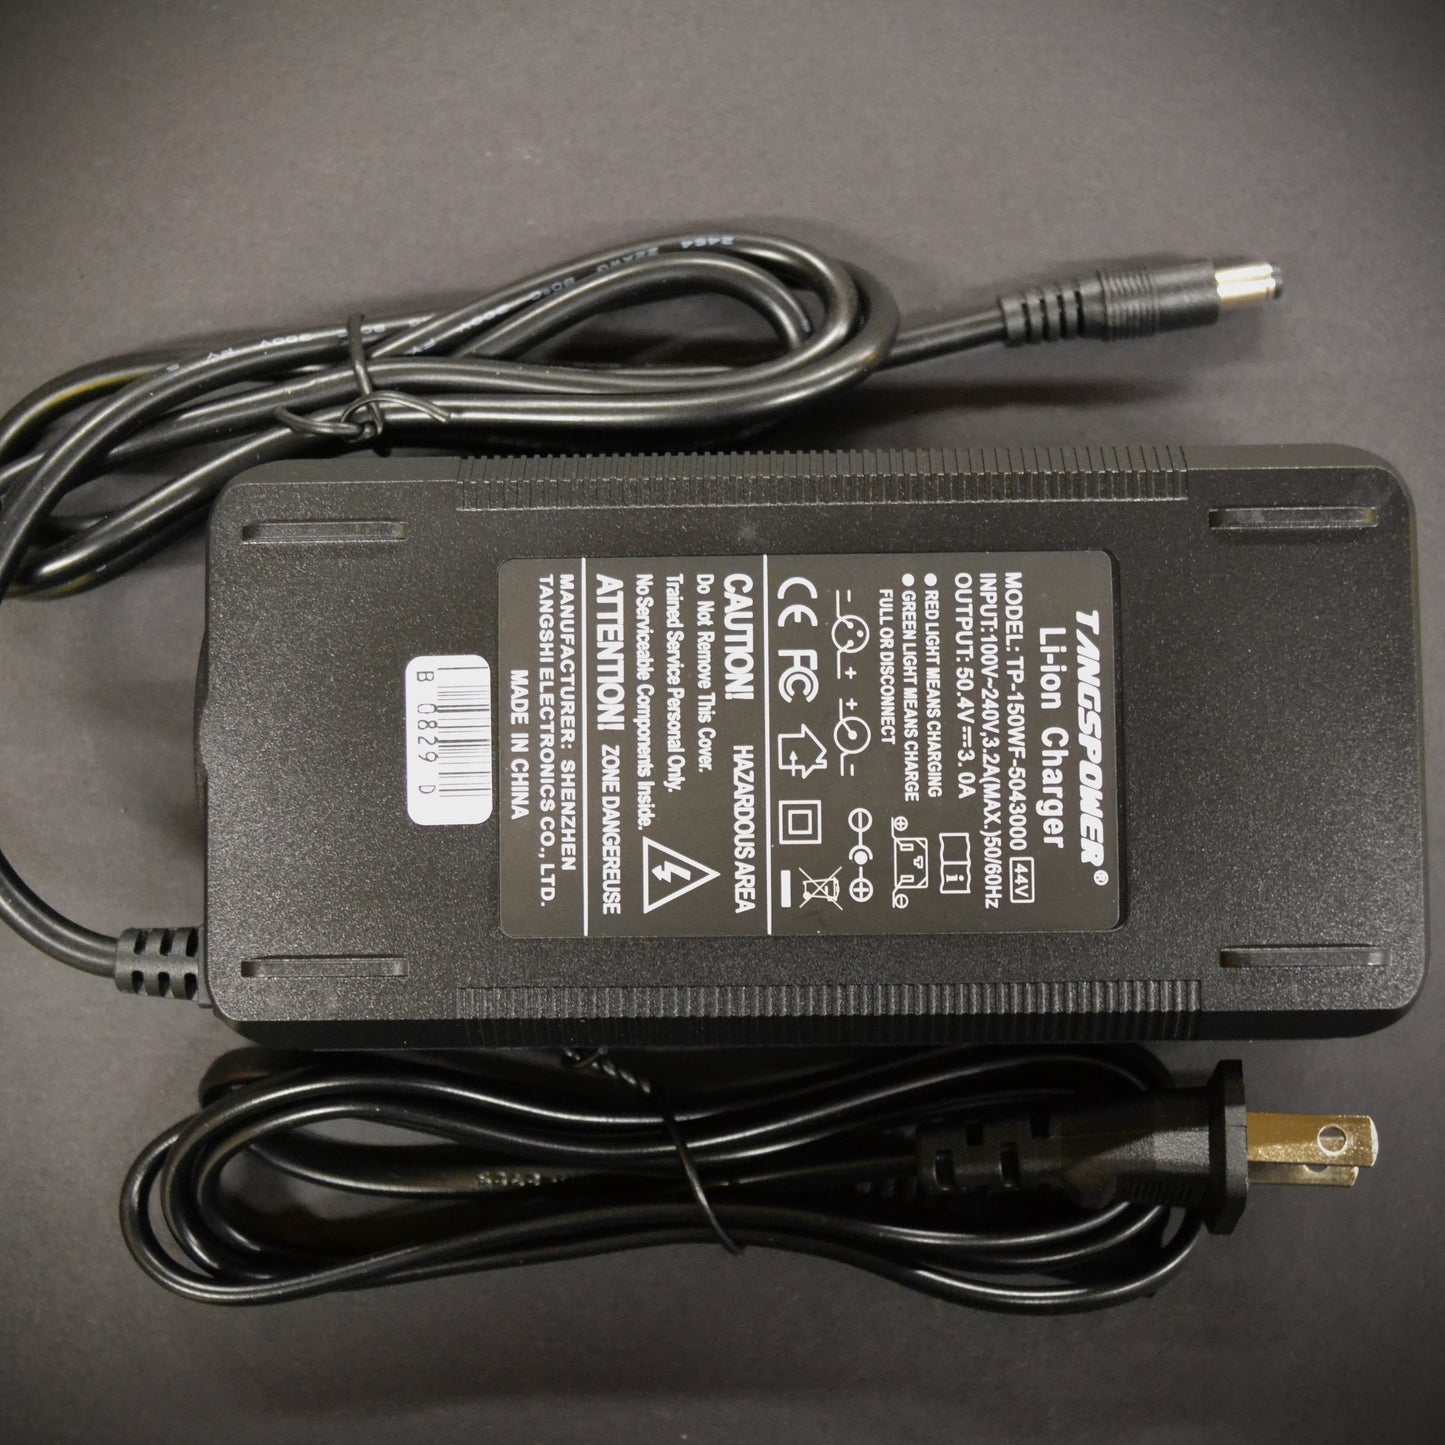 Charger - 12S (50.4V) 3 Amp - Lithium Ion